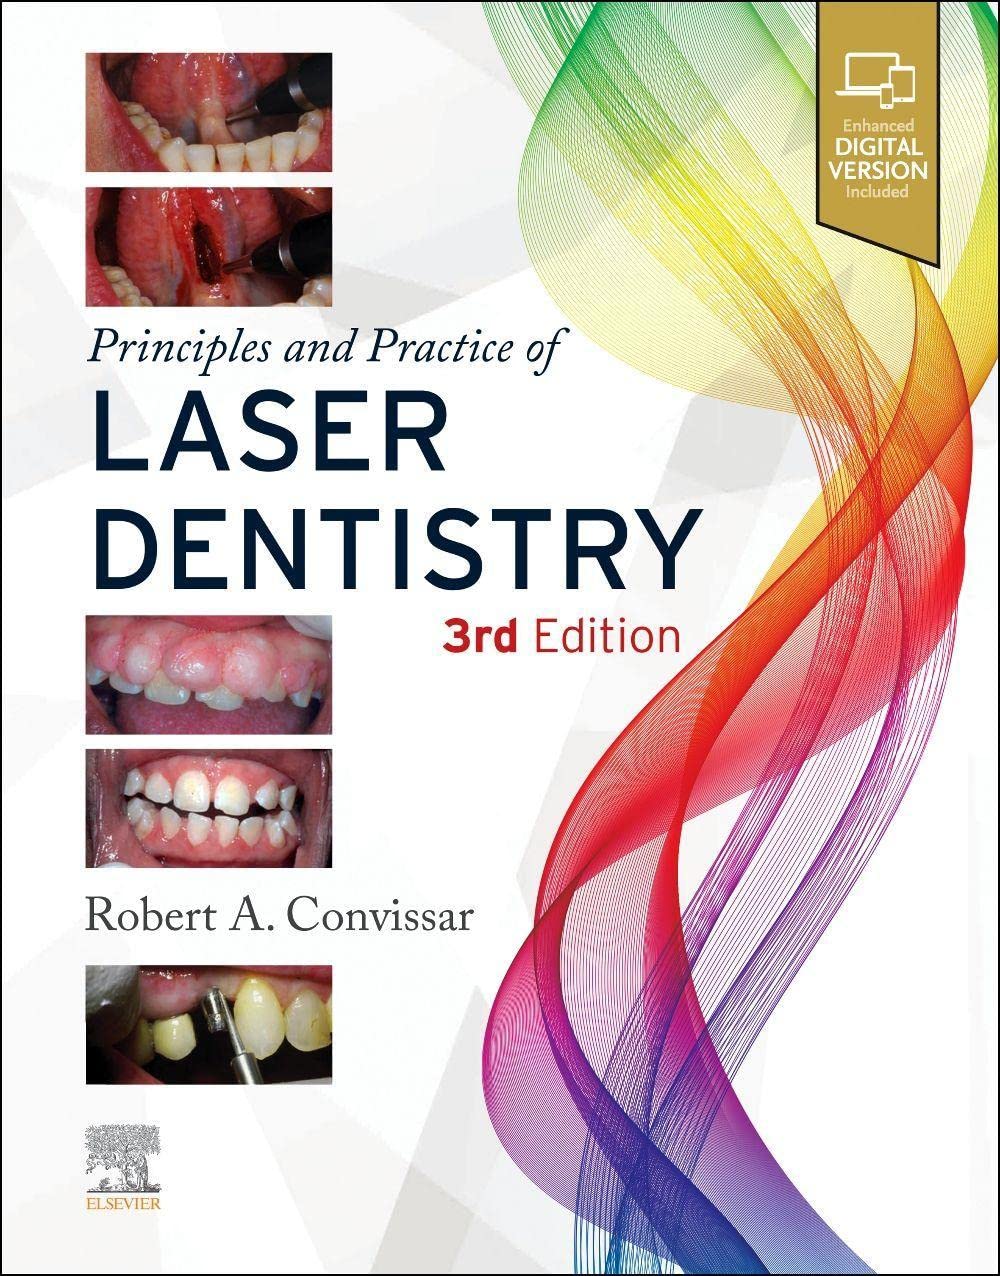 Principles and Practice of Laser Dentistry, 3rd edition by Robert A. Convissar DDS FAGD